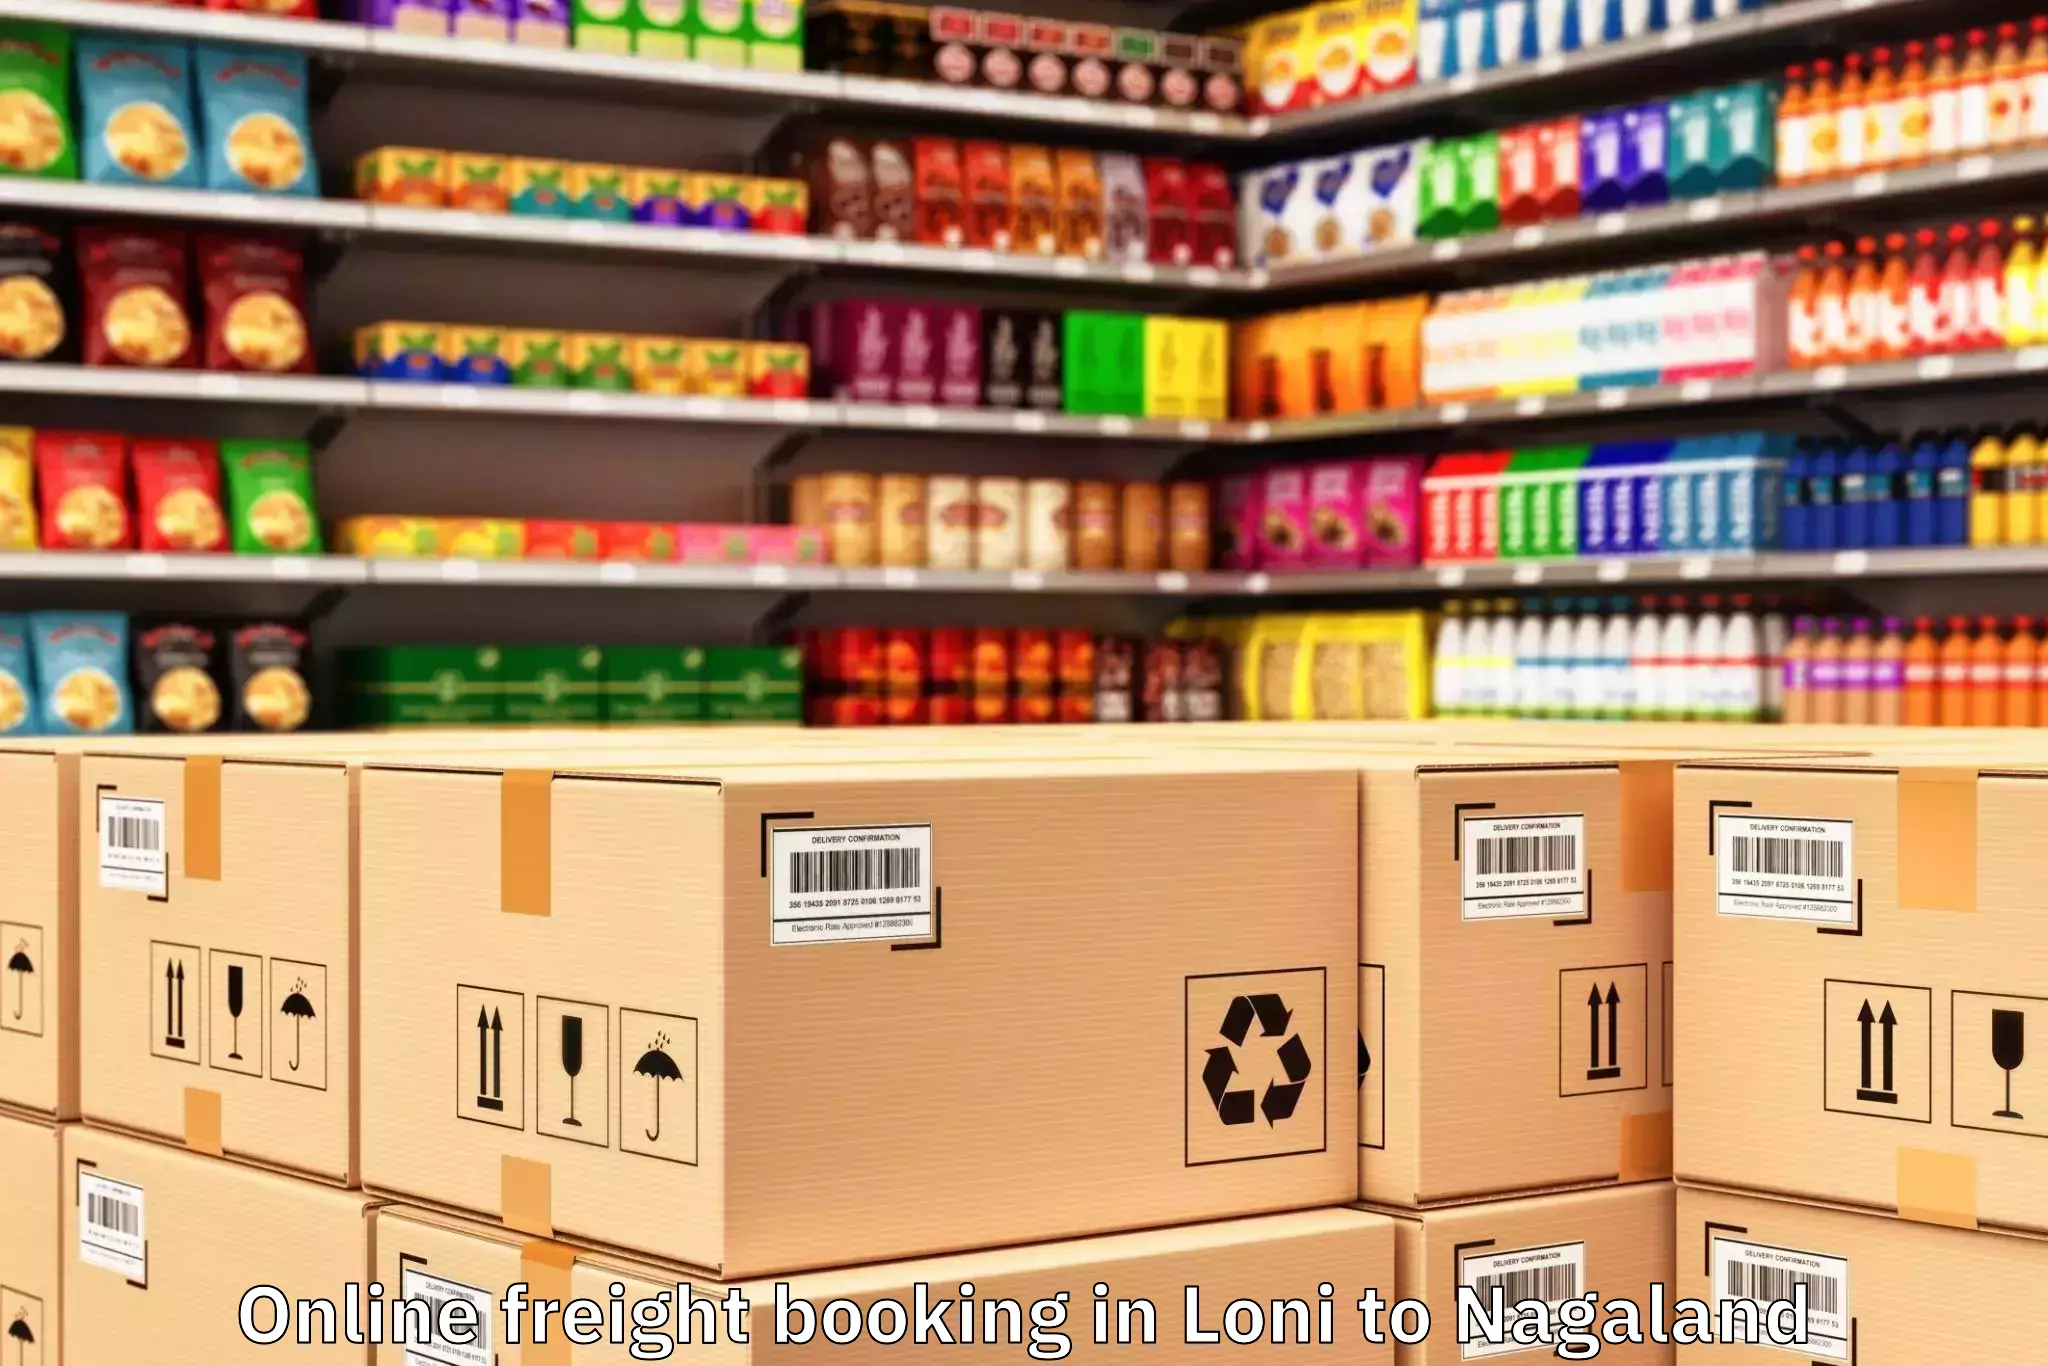 Leading Loni to Baghty Online Freight Booking Provider